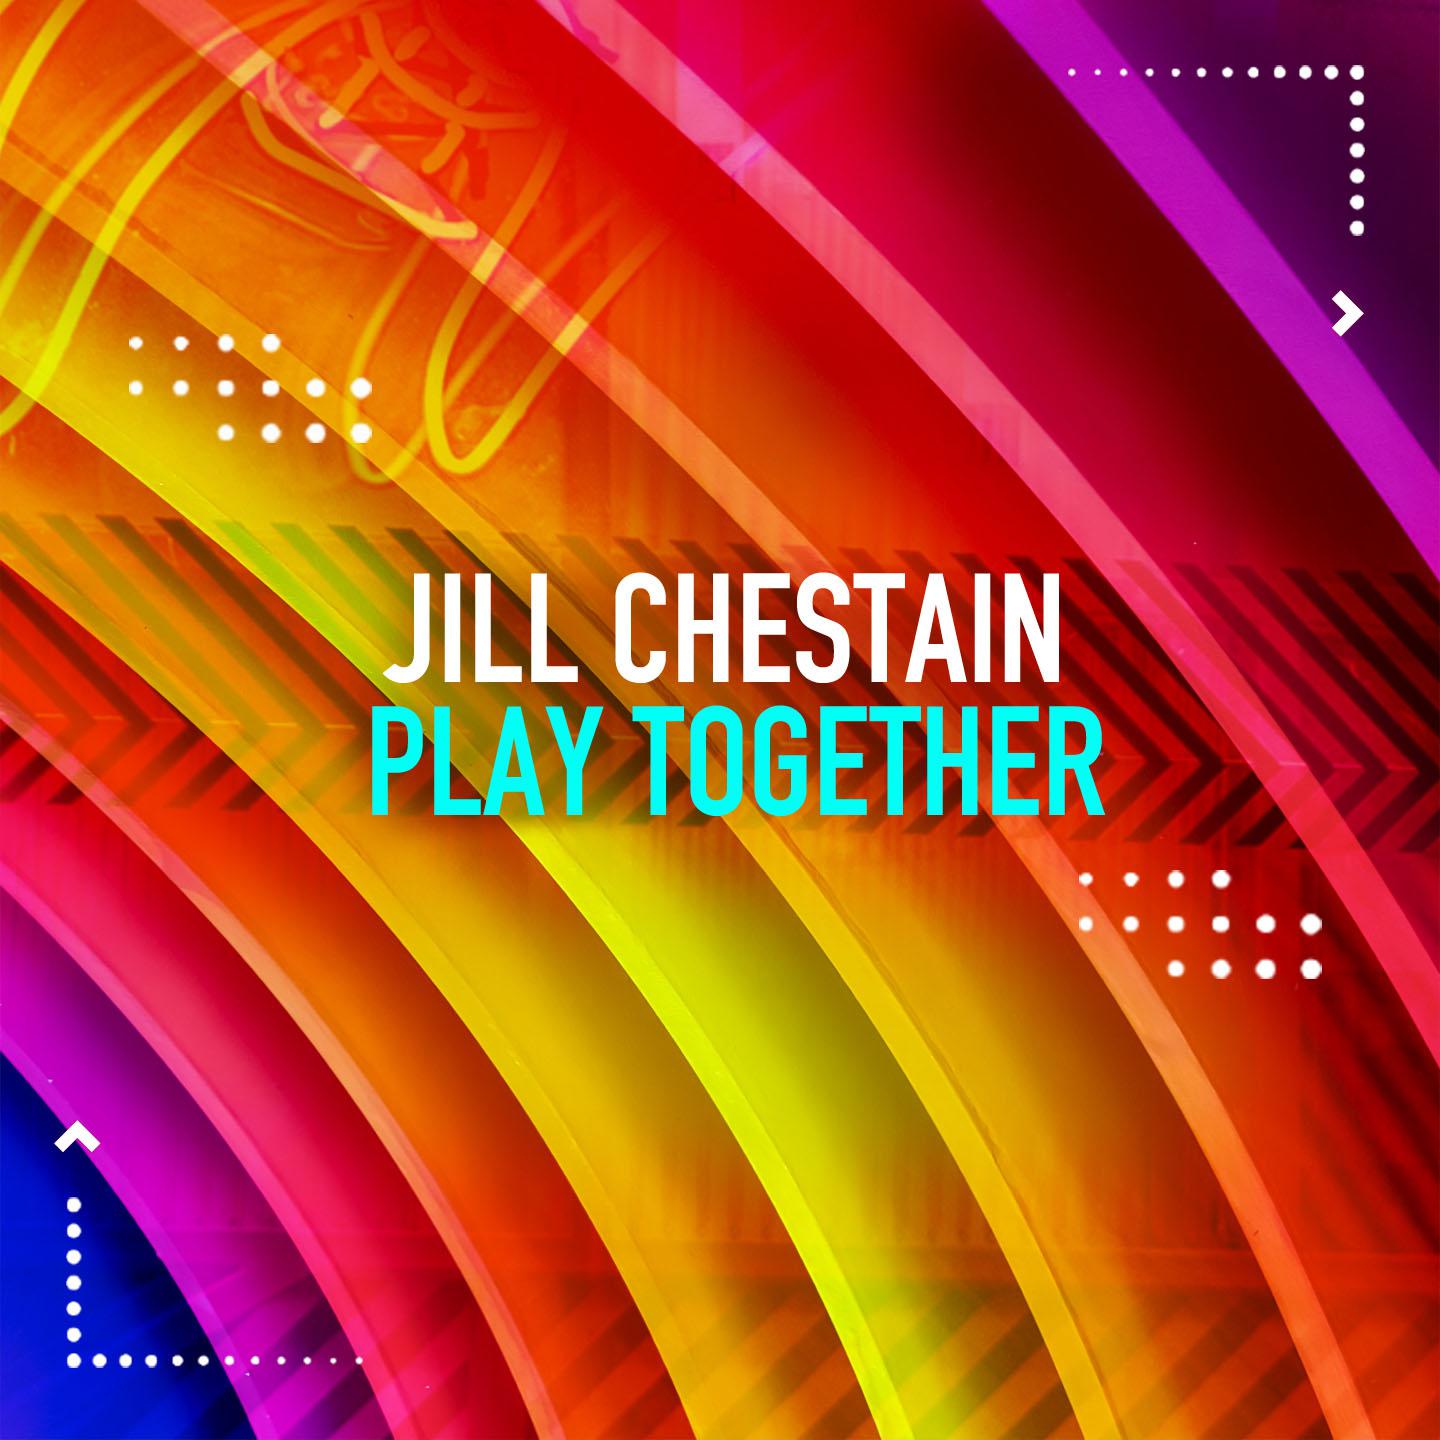 Jill Chestain - Play Together (Hello Mix)